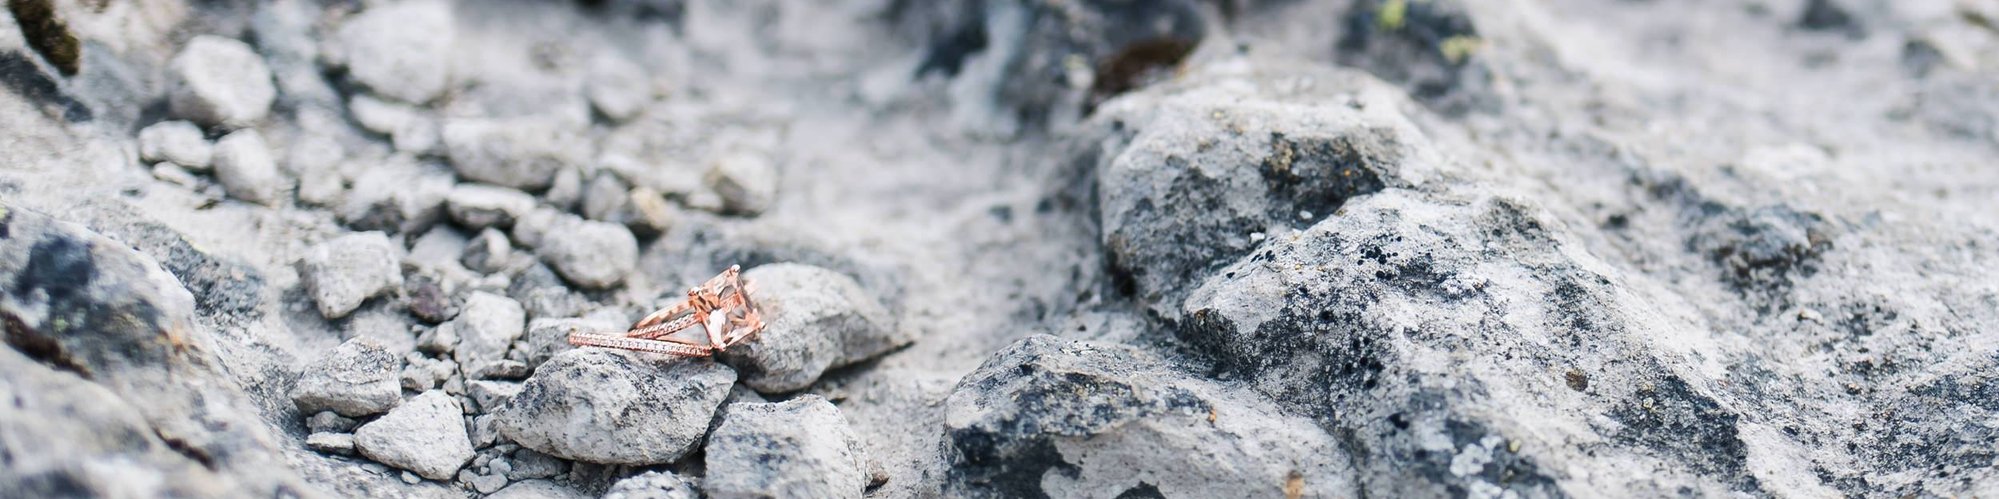 A pair of rose-gold rings glitters against textured white rocks in the Napa County mountains